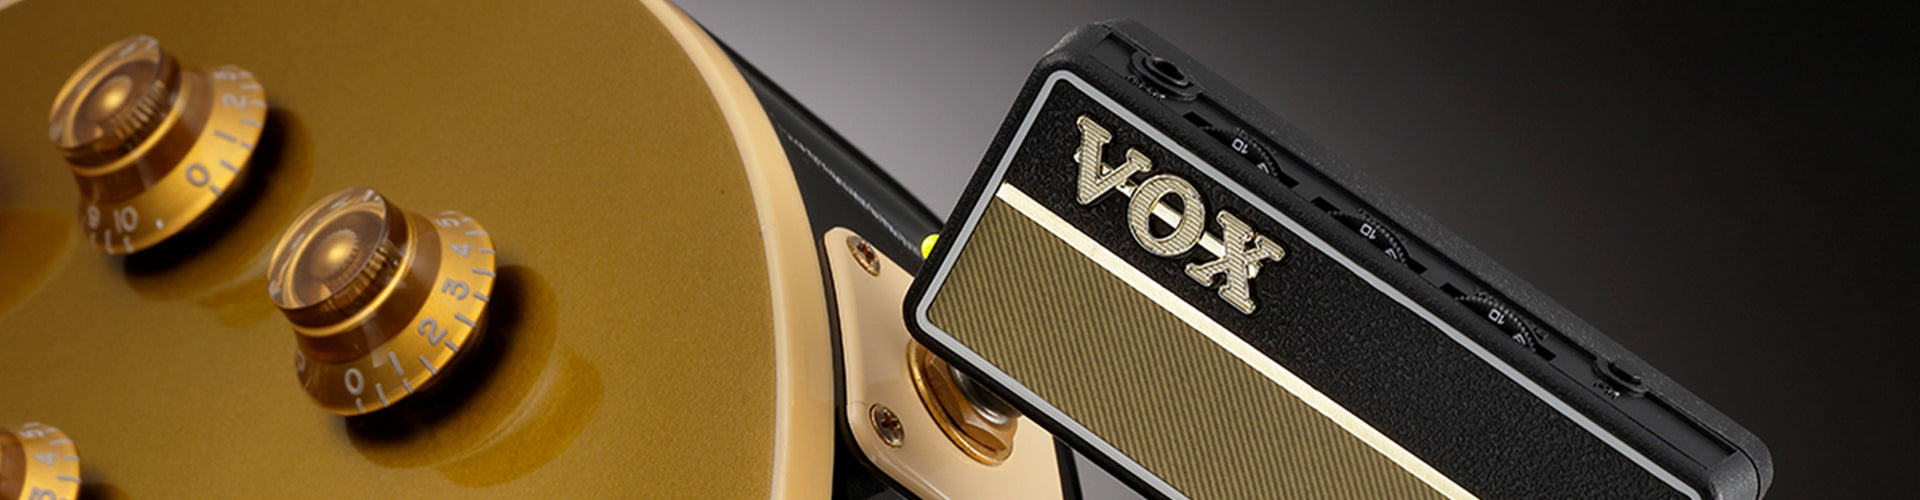 VOX amPlug Collection  Pocket amplifier for practice anytime